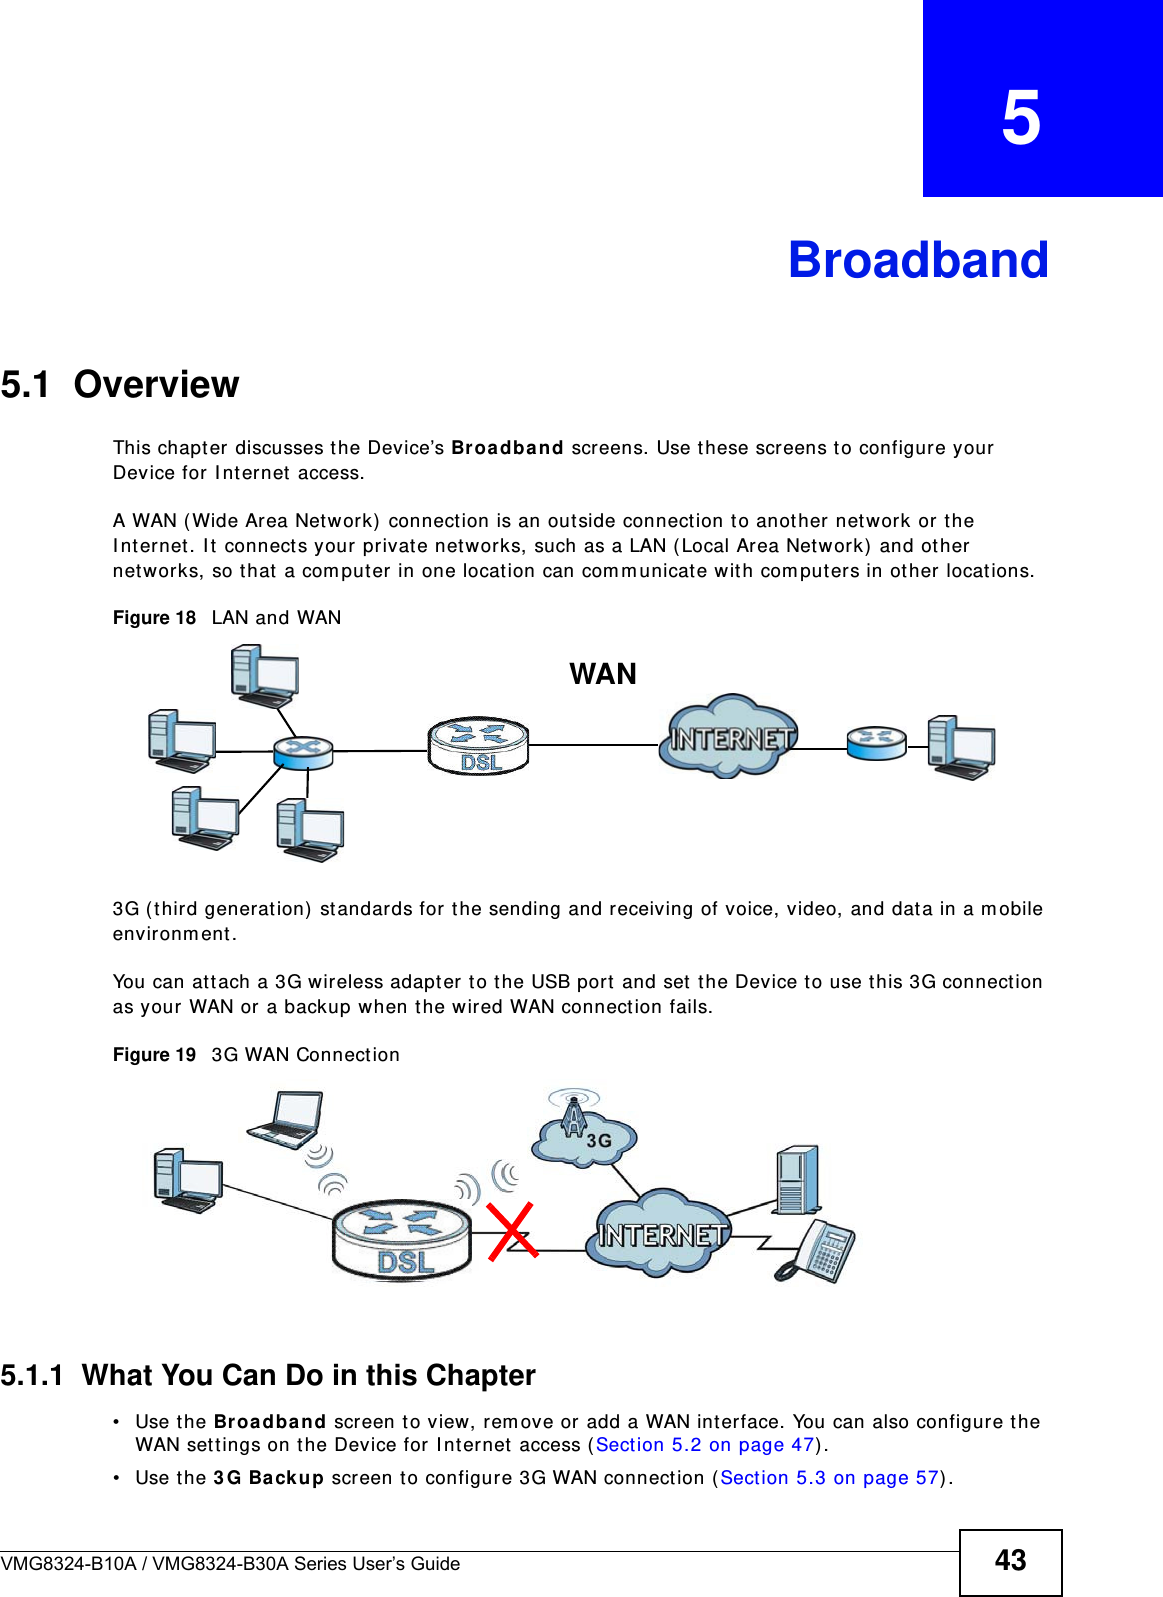 VMG8324-B10A / VMG8324-B30A Series User’s Guide 43CHAPTER   5Broadband5.1  OverviewThis chapt er discusses t he Device’s Br oadba n d screens. Use t hese screens to configure your Device for I nternet  access.A WAN ( Wide Area Net work)  connect ion is an out side connect ion to another  net wor k or t he I nt ernet . I t connects your privat e networks, such as a LAN ( Local Area Network)  and other  net works, so that a com put er in one locat ion can com m unicate with com puters in ot her locat ions.Figure 18   LAN and WAN3G ( t hird generat ion)  st andards for t he sending and receiving of voice, video, and dat a in a m obile environm ent . You can at tach a 3G wireless adapt er t o t he USB port and set t he Device t o use this 3G connect ion as your WAN or a backup w hen t he wired WAN connection fails.Figure 19   3G WAN Connect ion 5.1.1  What You Can Do in this Chapter• Use the Broadband screen t o view, rem ove or add a WAN int erface. You can also configure t he WAN sett ings on t he Device for I nt ernet  access ( Sect ion 5.2 on page 47) .• Use the 3 G Ba ck up screen t o configure 3G WAN connection ( Sect ion 5.3 on page 57) . WAN